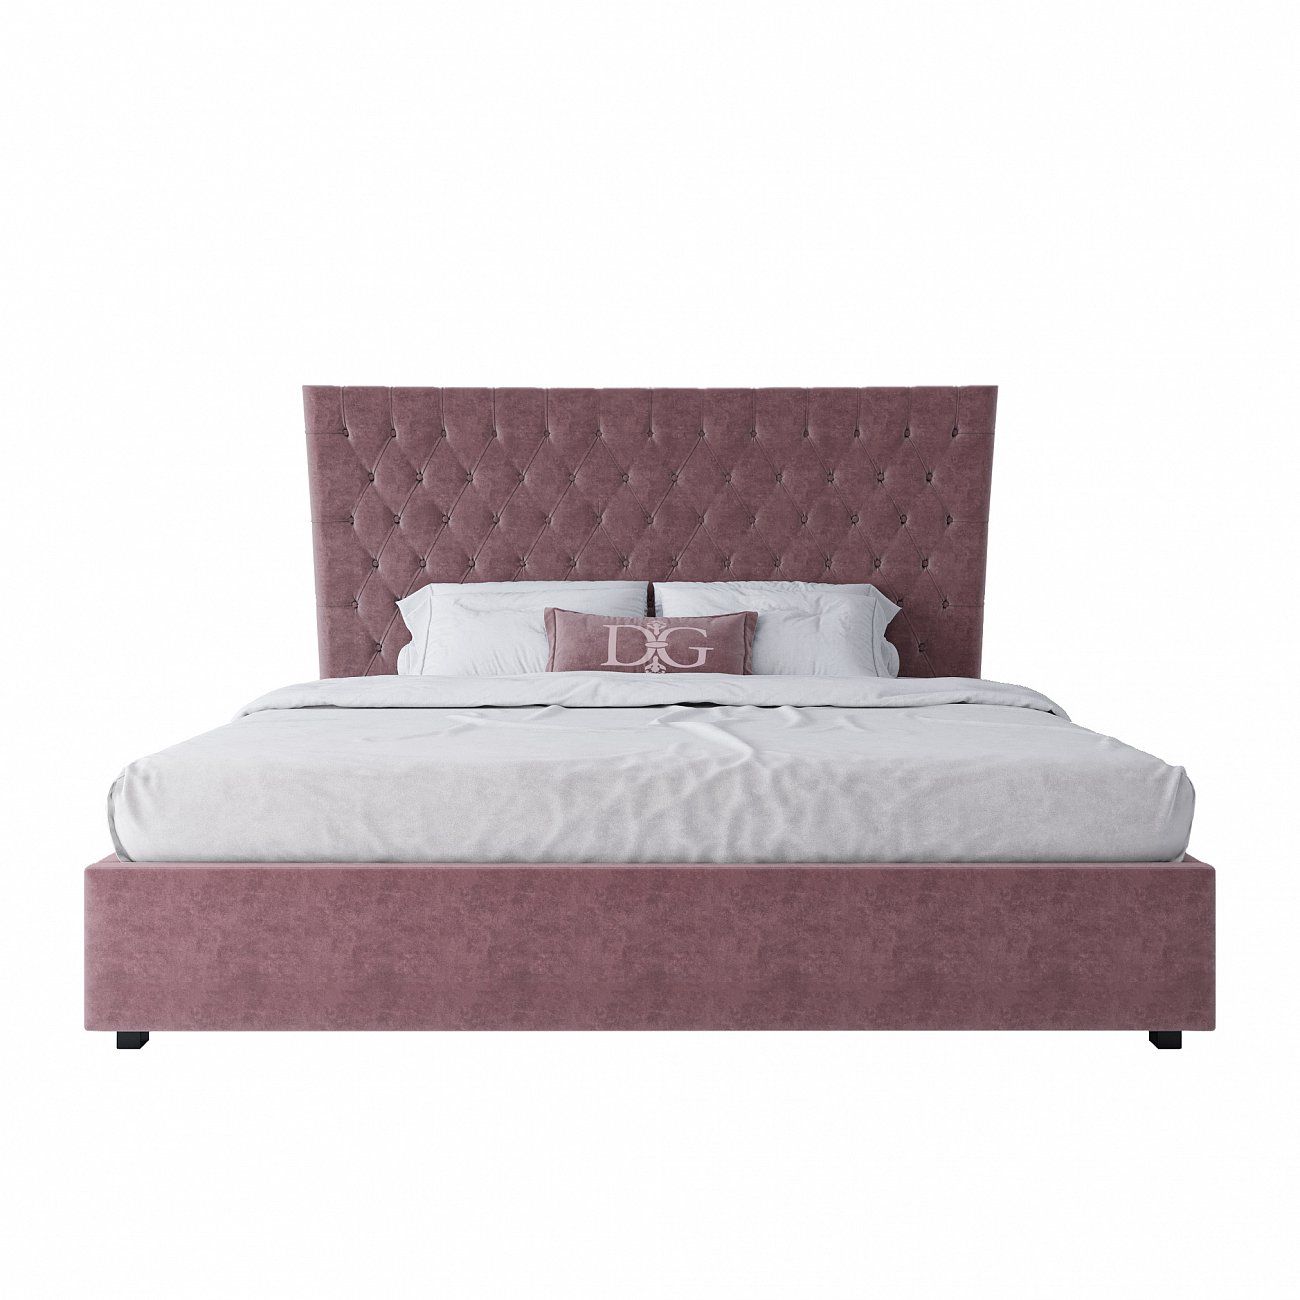 Euro bed with upholstered headboard 200x200 cm dusty rose QuickSand